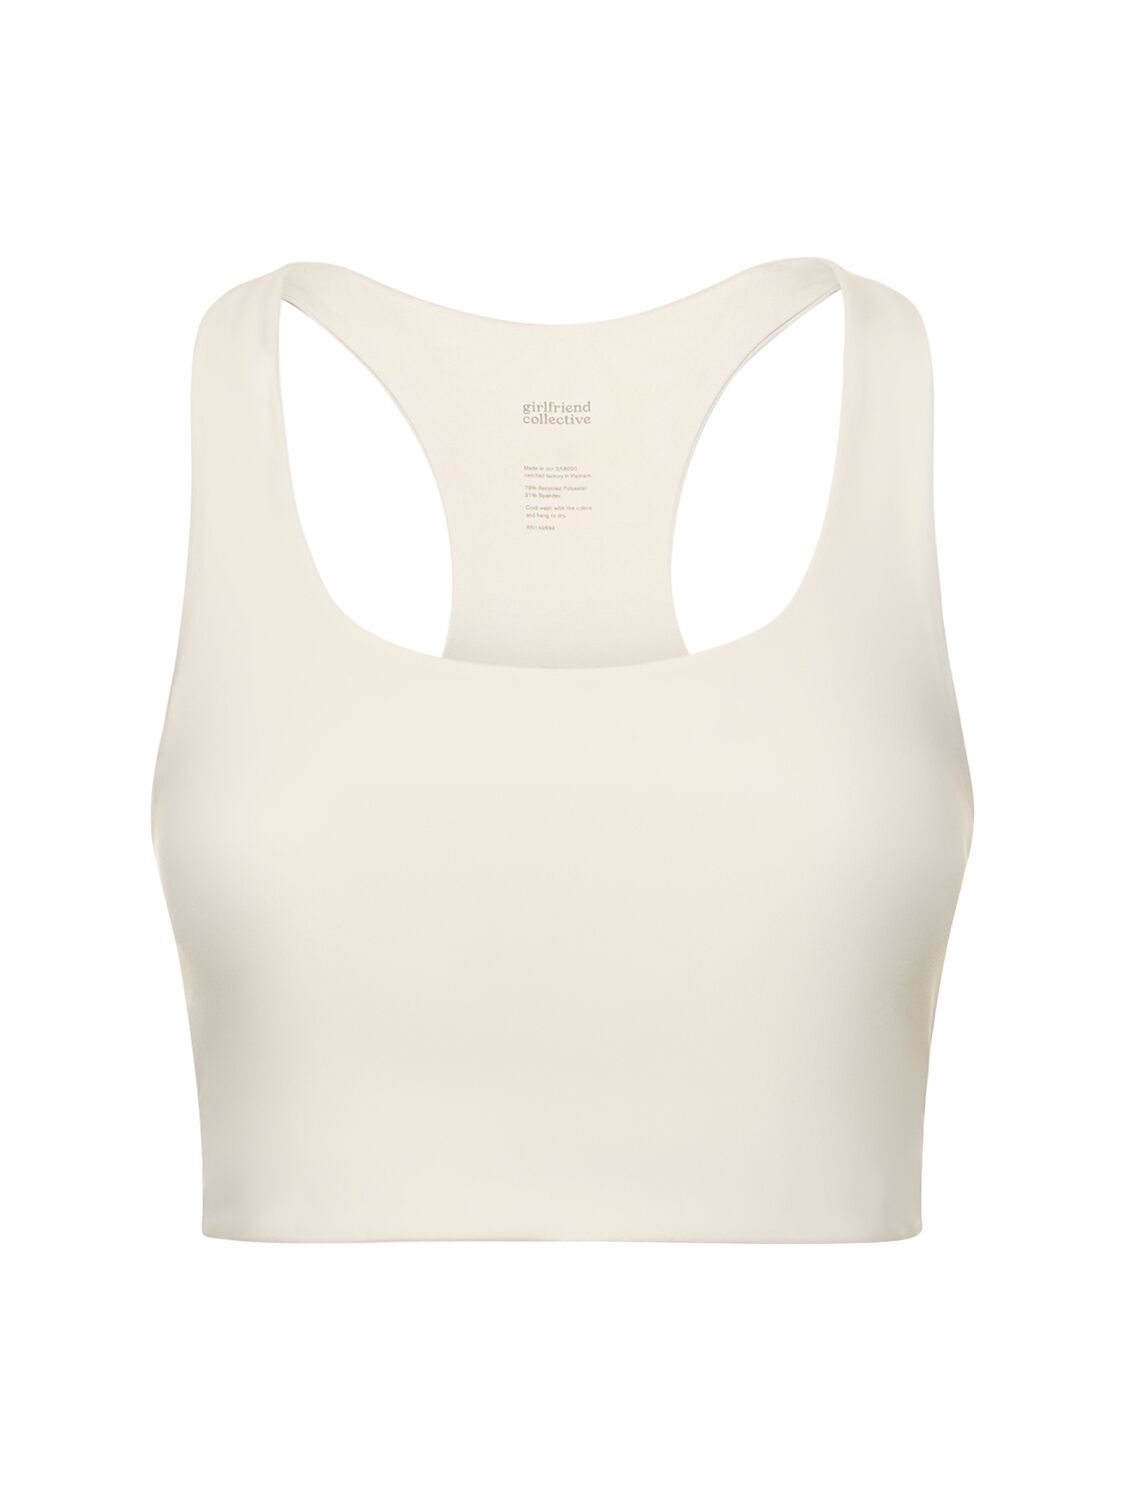 Girlfriend Collective Paloma Stretch Tech Bra Top In Neutral